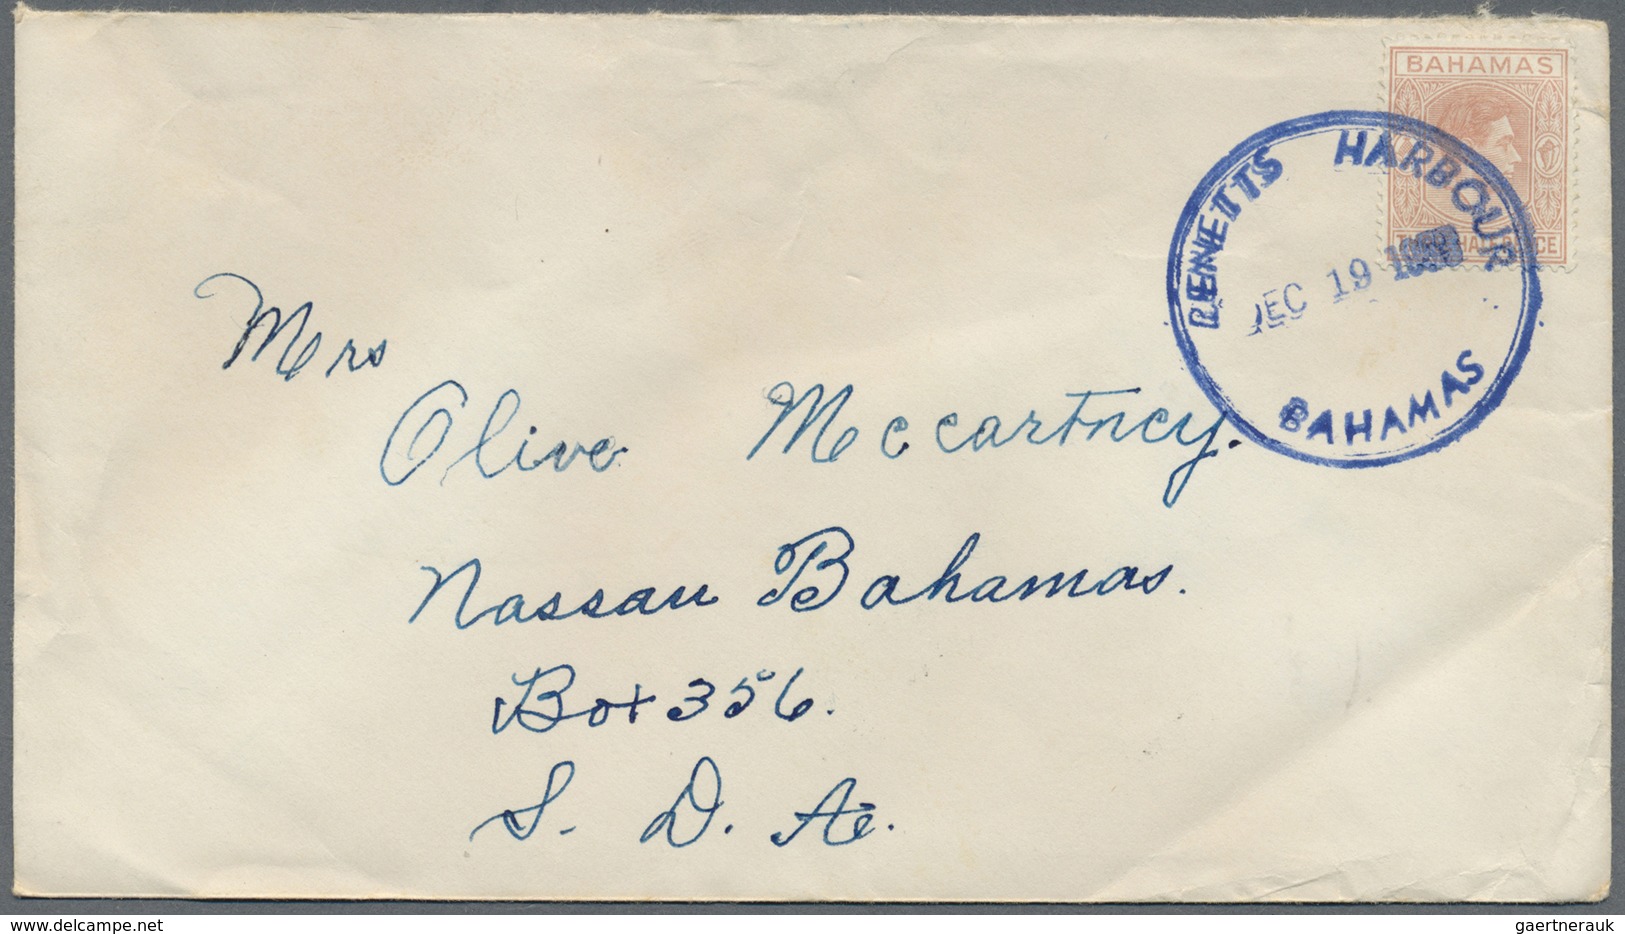 GA/Br/MK Bahamas: 1937 - 1955, great lot of over 940 covers, mainly before 1955, 1948 silver-wedding cpl set